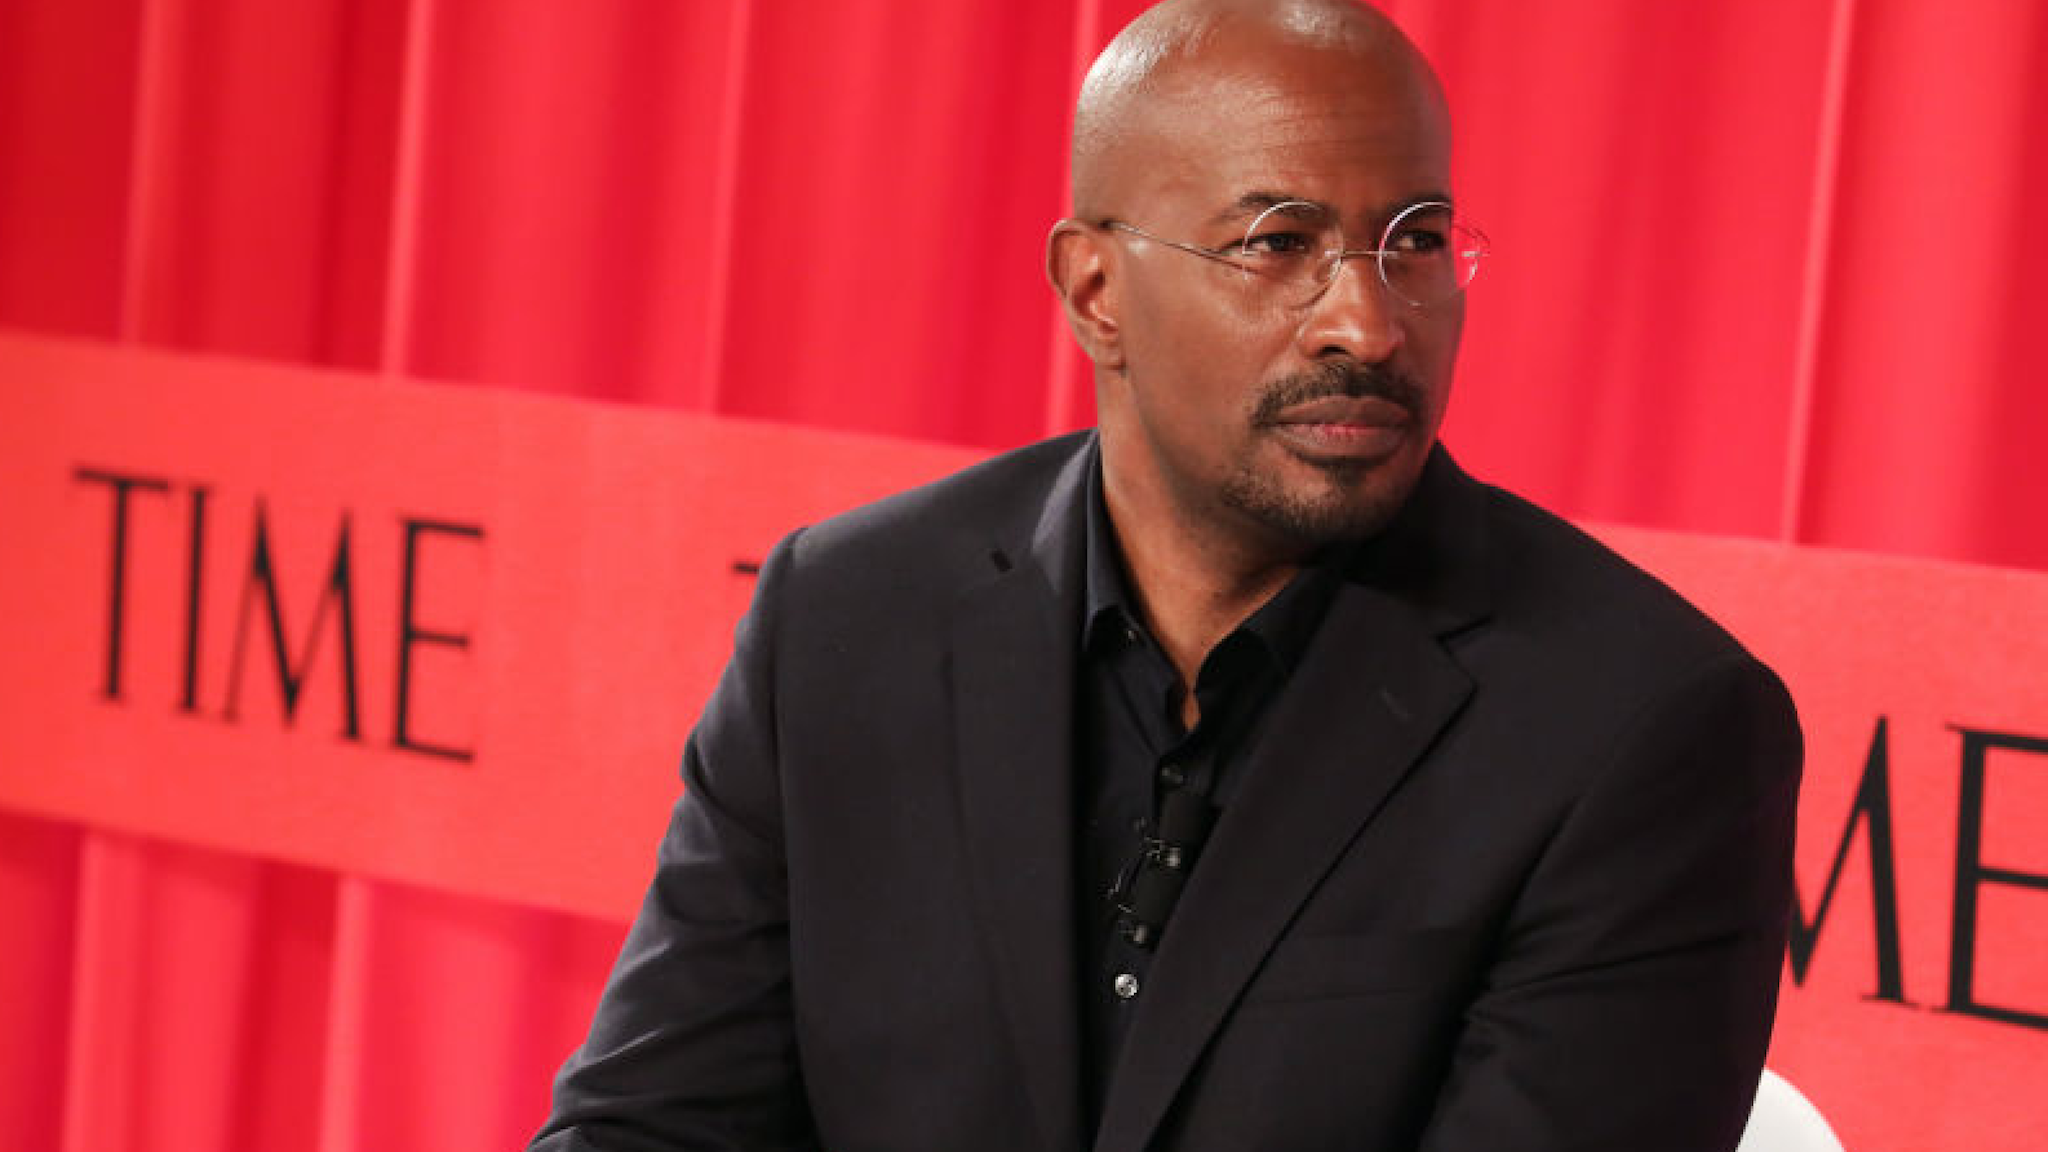 Van Jones participates in a panel discussion during the TIME 100 Summit 2019 on April 23, 2019 in New York City.